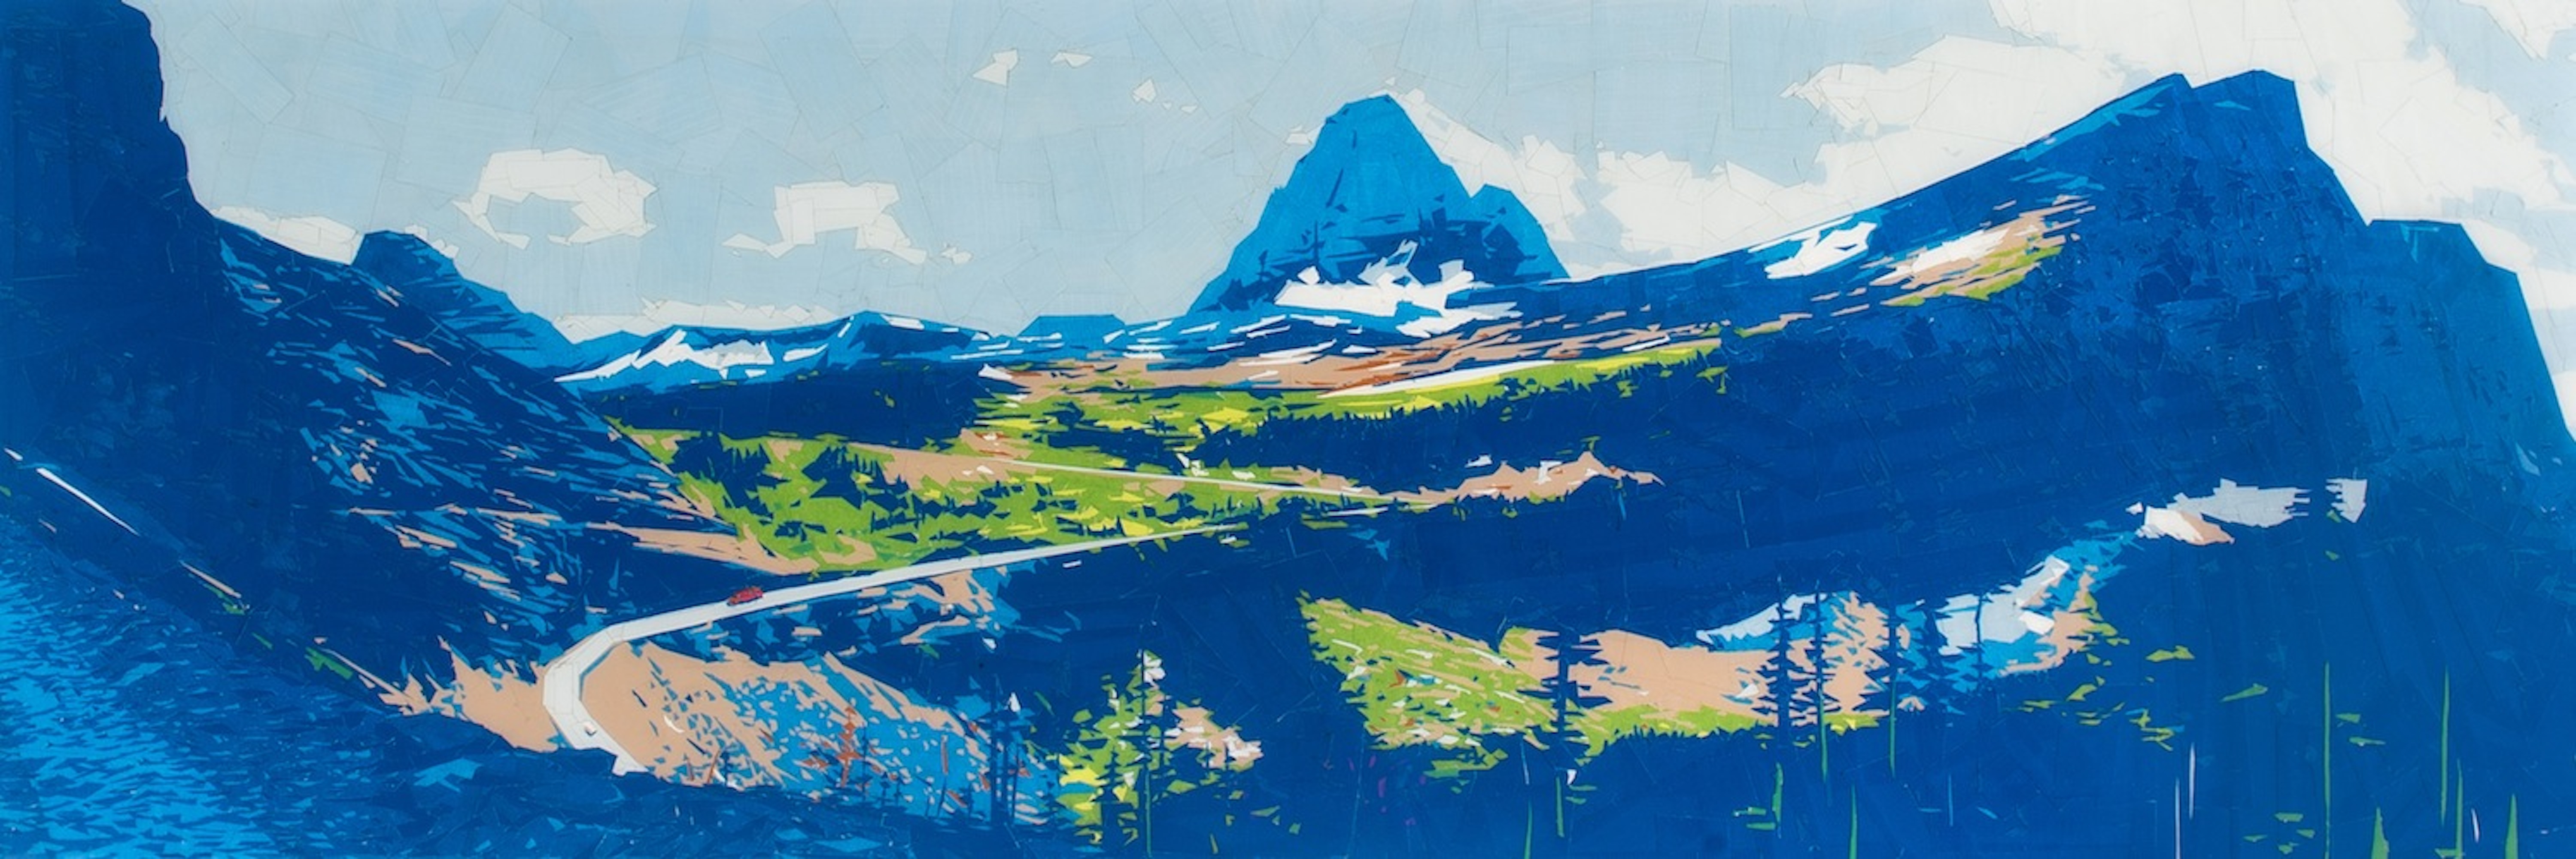 Mountain landscape in Glacier National Park created in tape by artist Chad Farnes